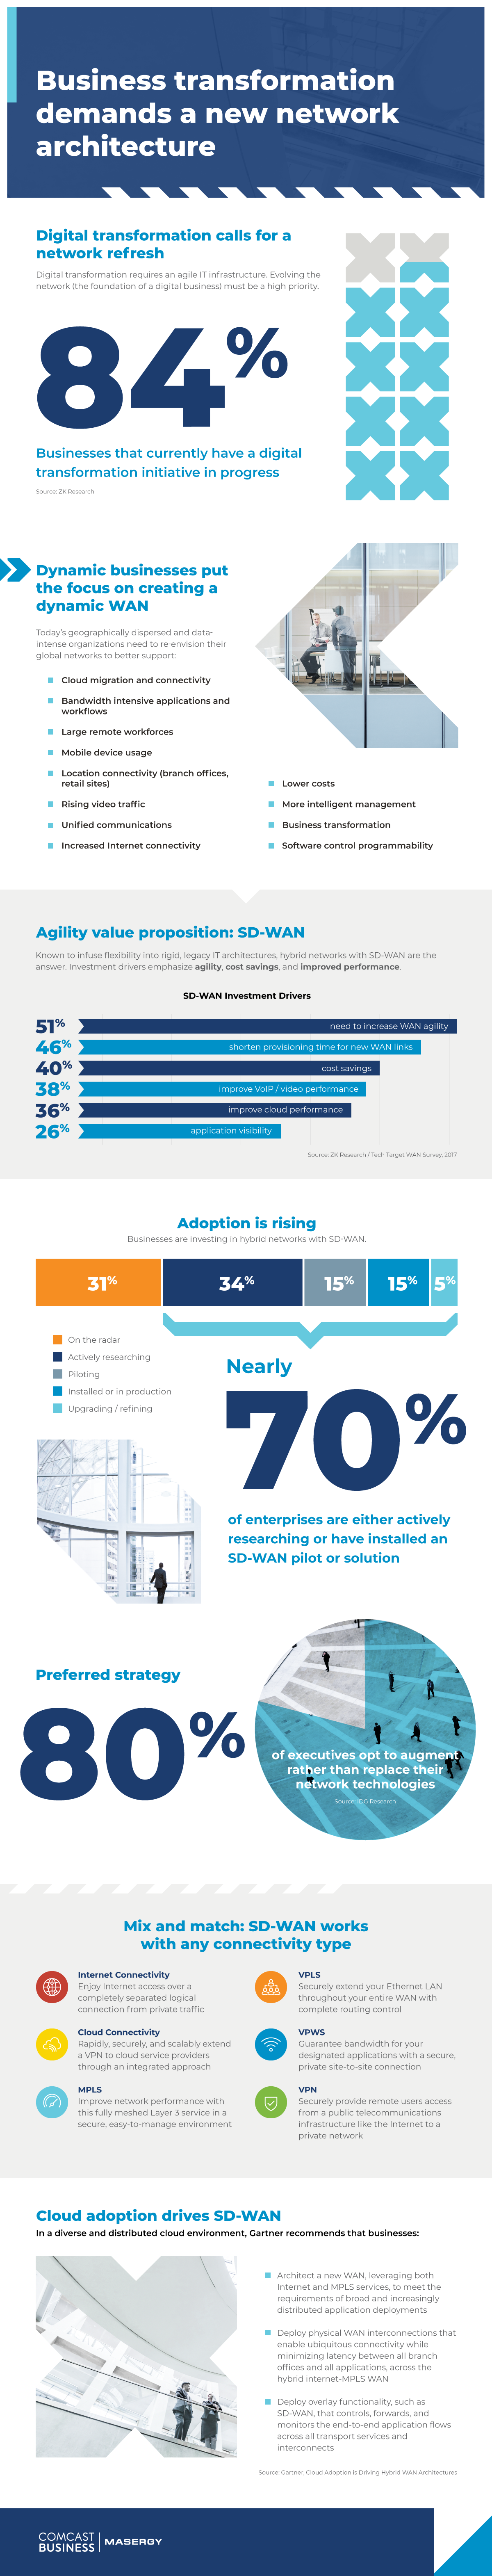 Infographic: Business Transformation Demands New Network Architectures